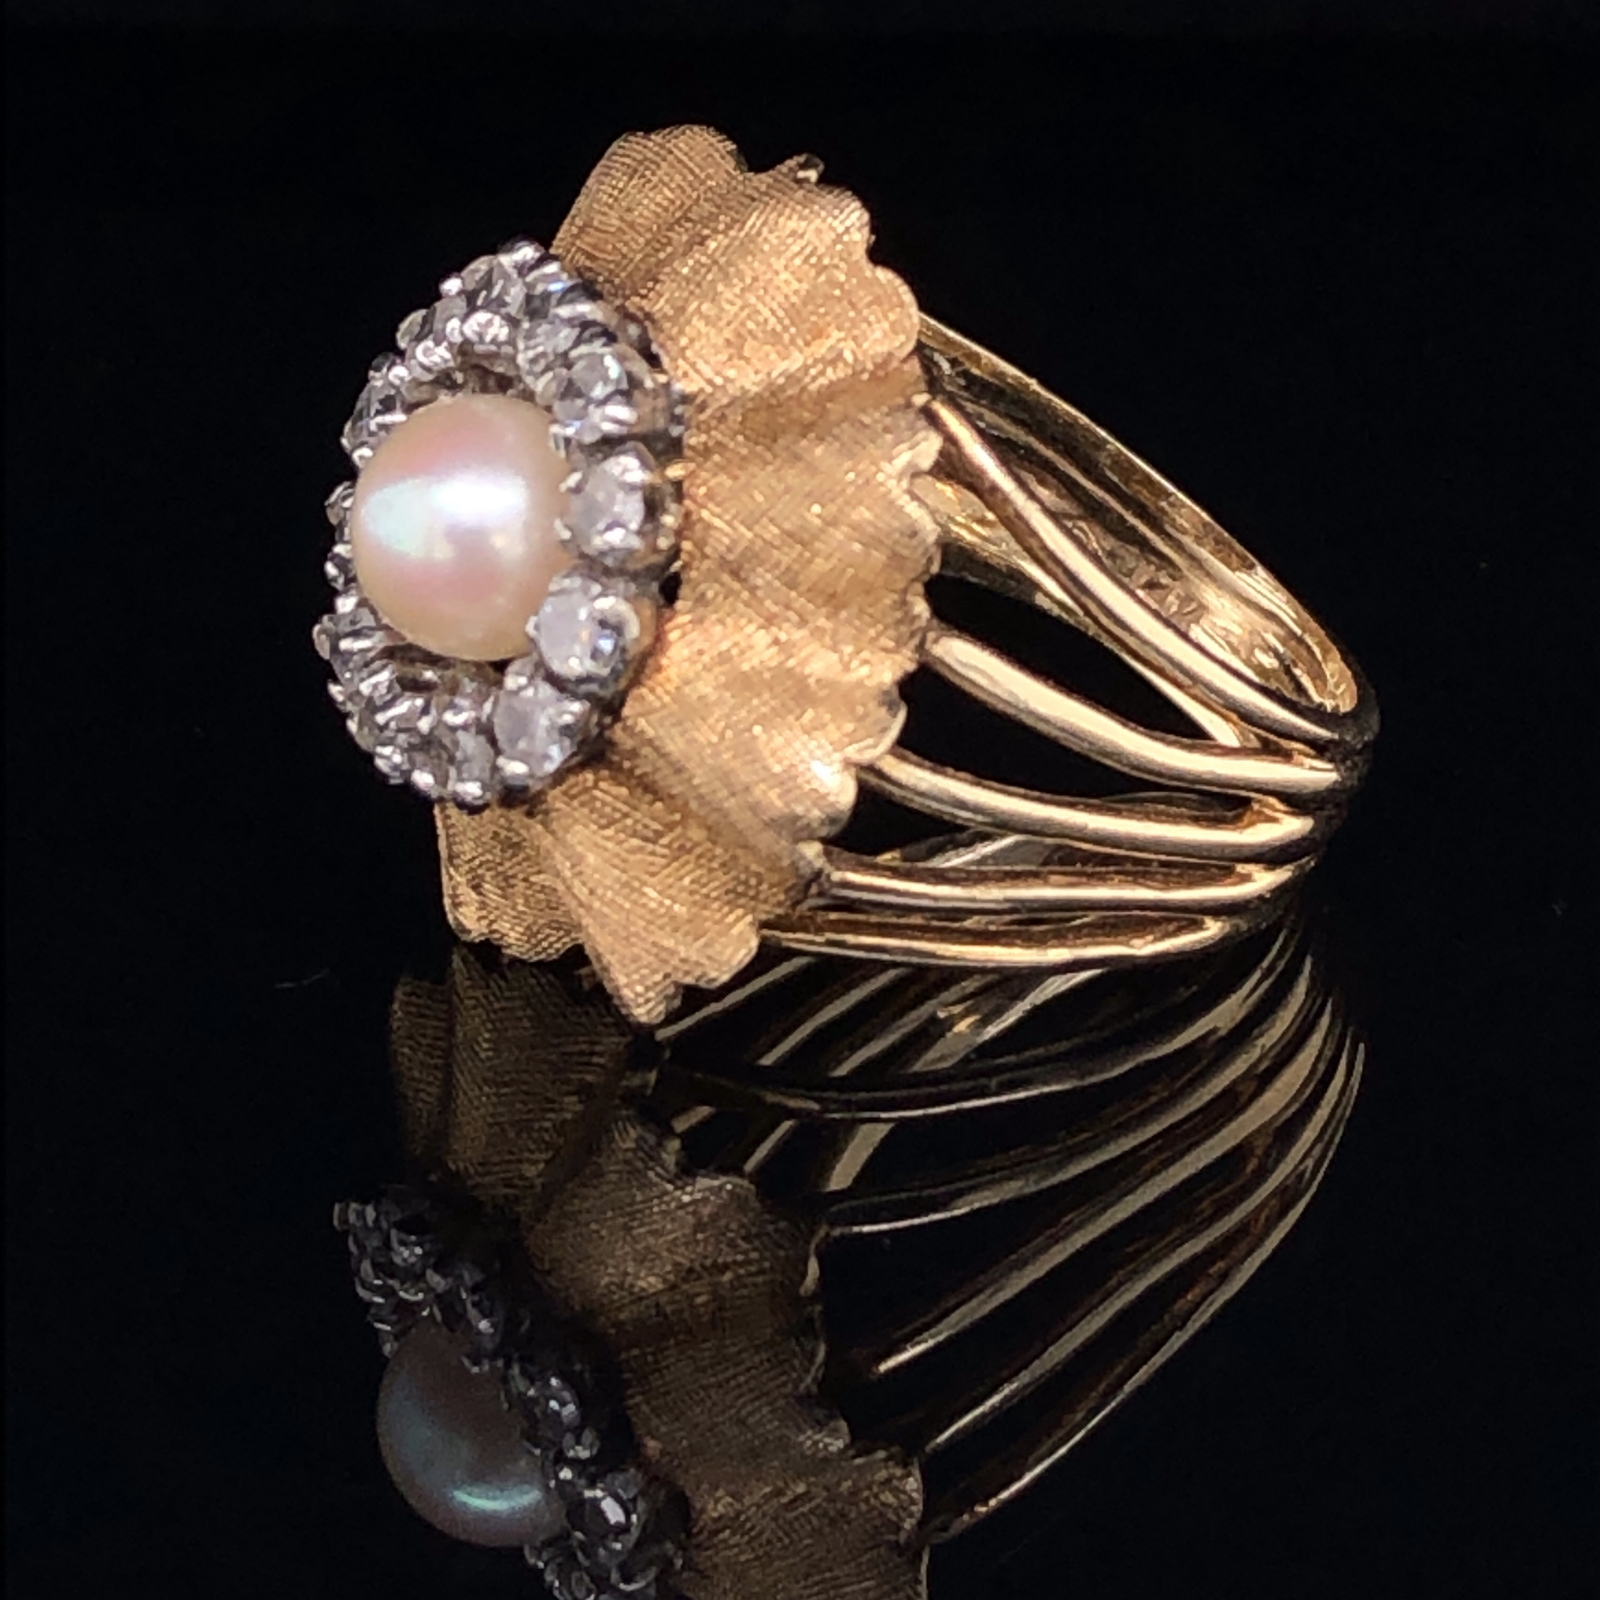 A 14ct GOLD PEARL AND DIAMOND VINTAGE RING. A SINGLE CULTURED PEARL SITS IN THE CENTRE OF A HALO - Image 6 of 7